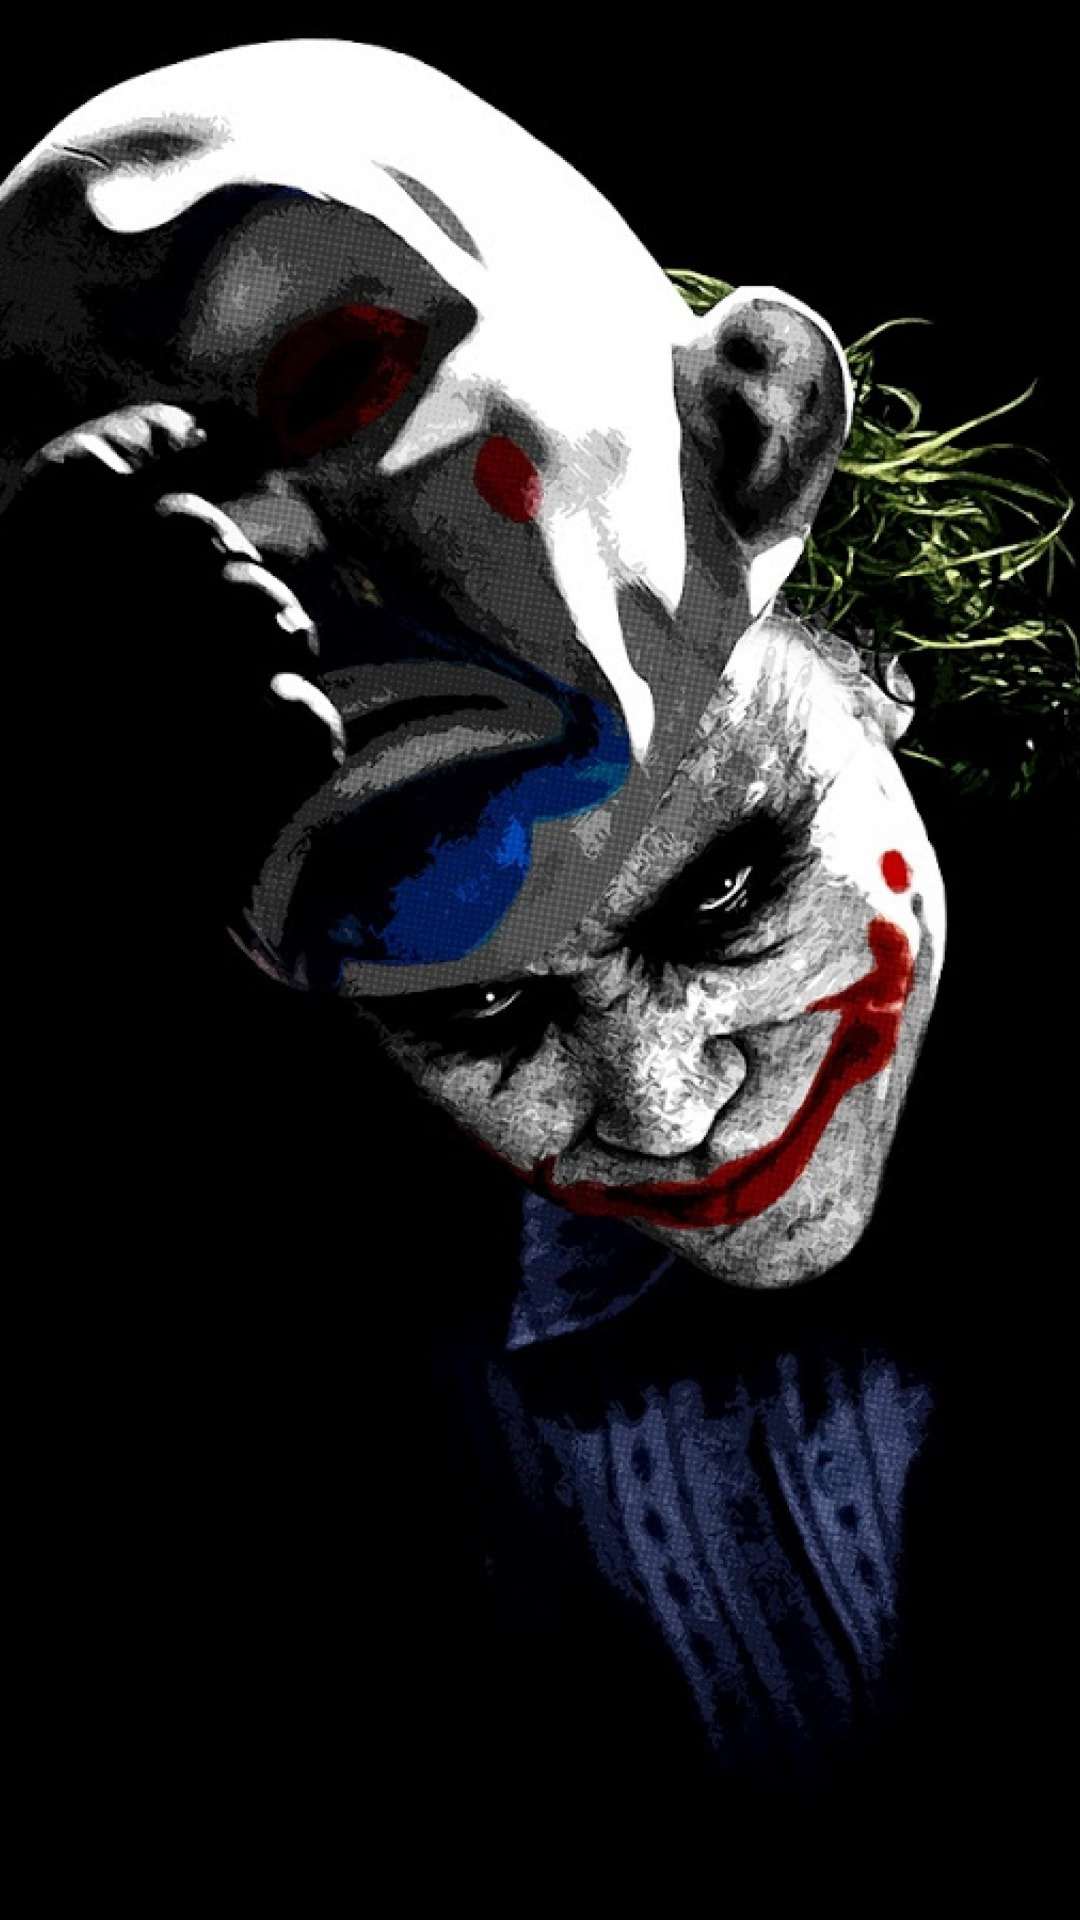 The Joker And Mask IPhone Wallpaper - IPhone Wallpapers : iPhone Wallpapers